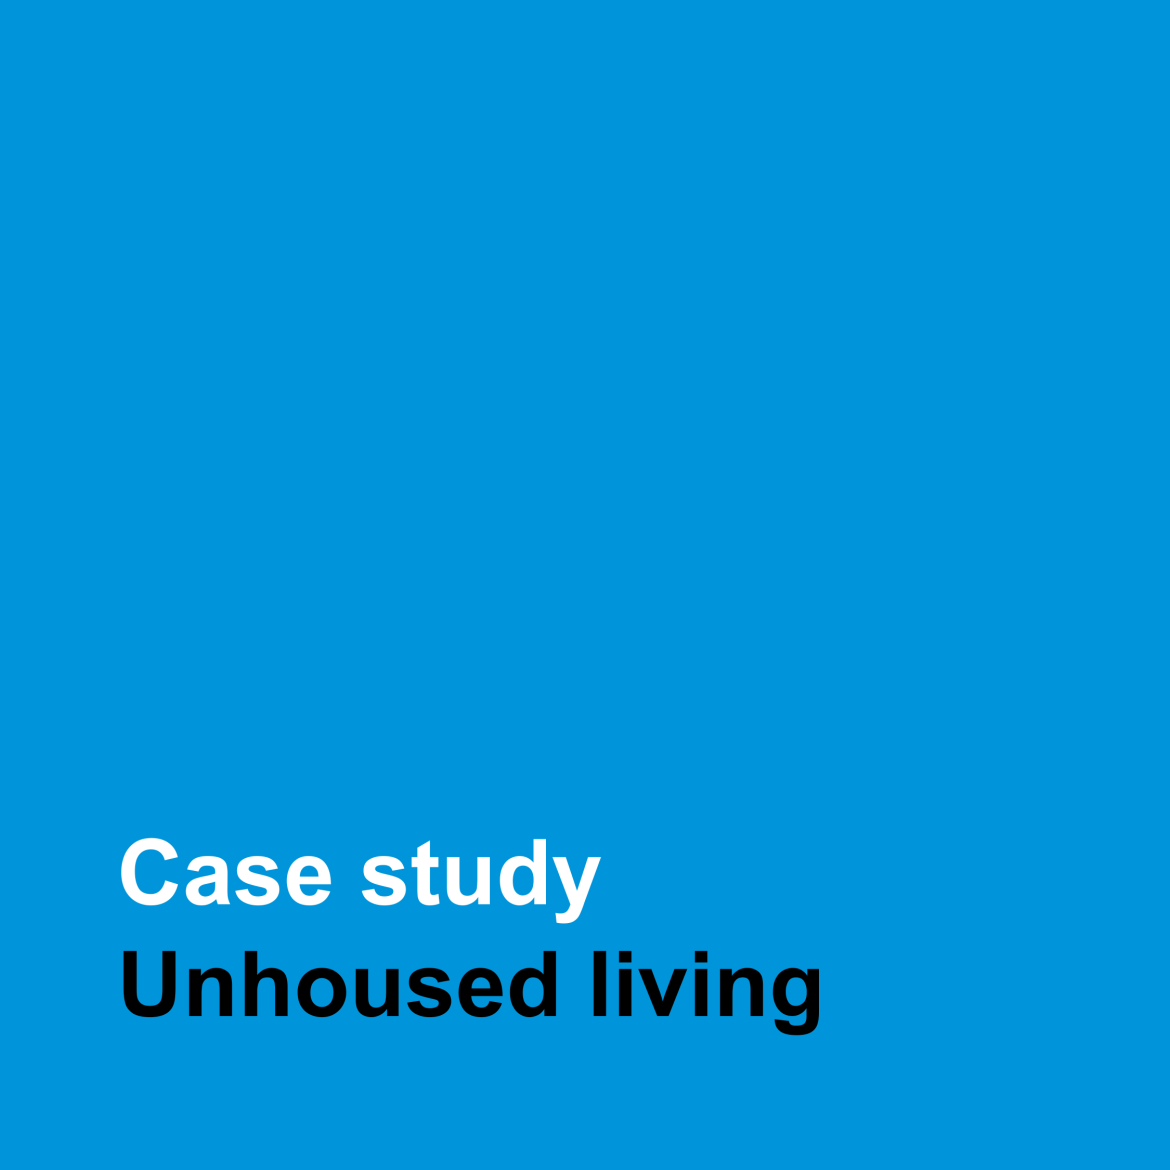 Case study about unhoused living